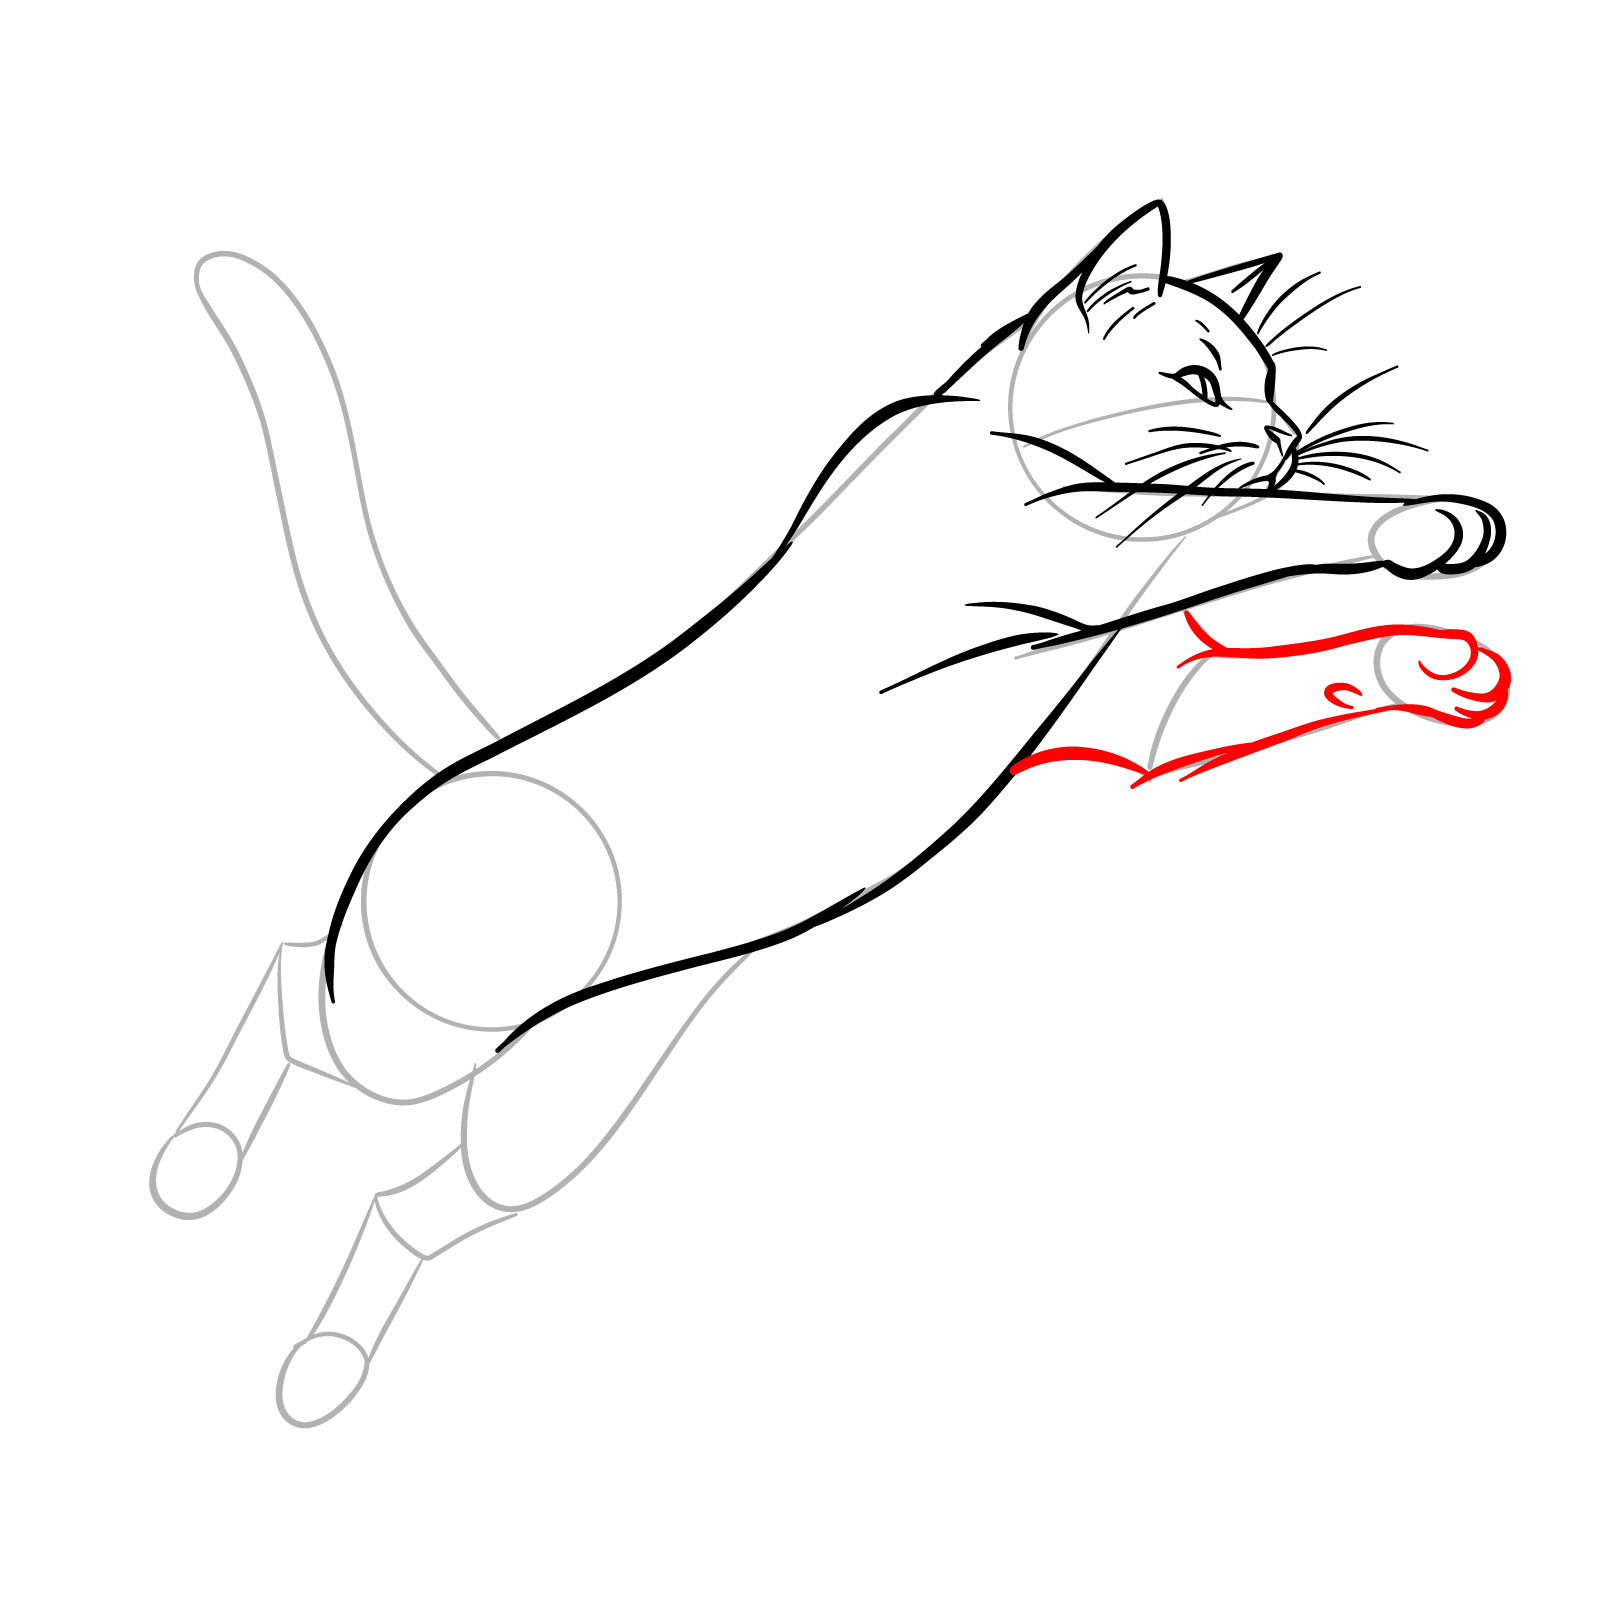 Sketch showing the addition of the second front leg and its paw in a dynamic jumping cat illustration - step 10